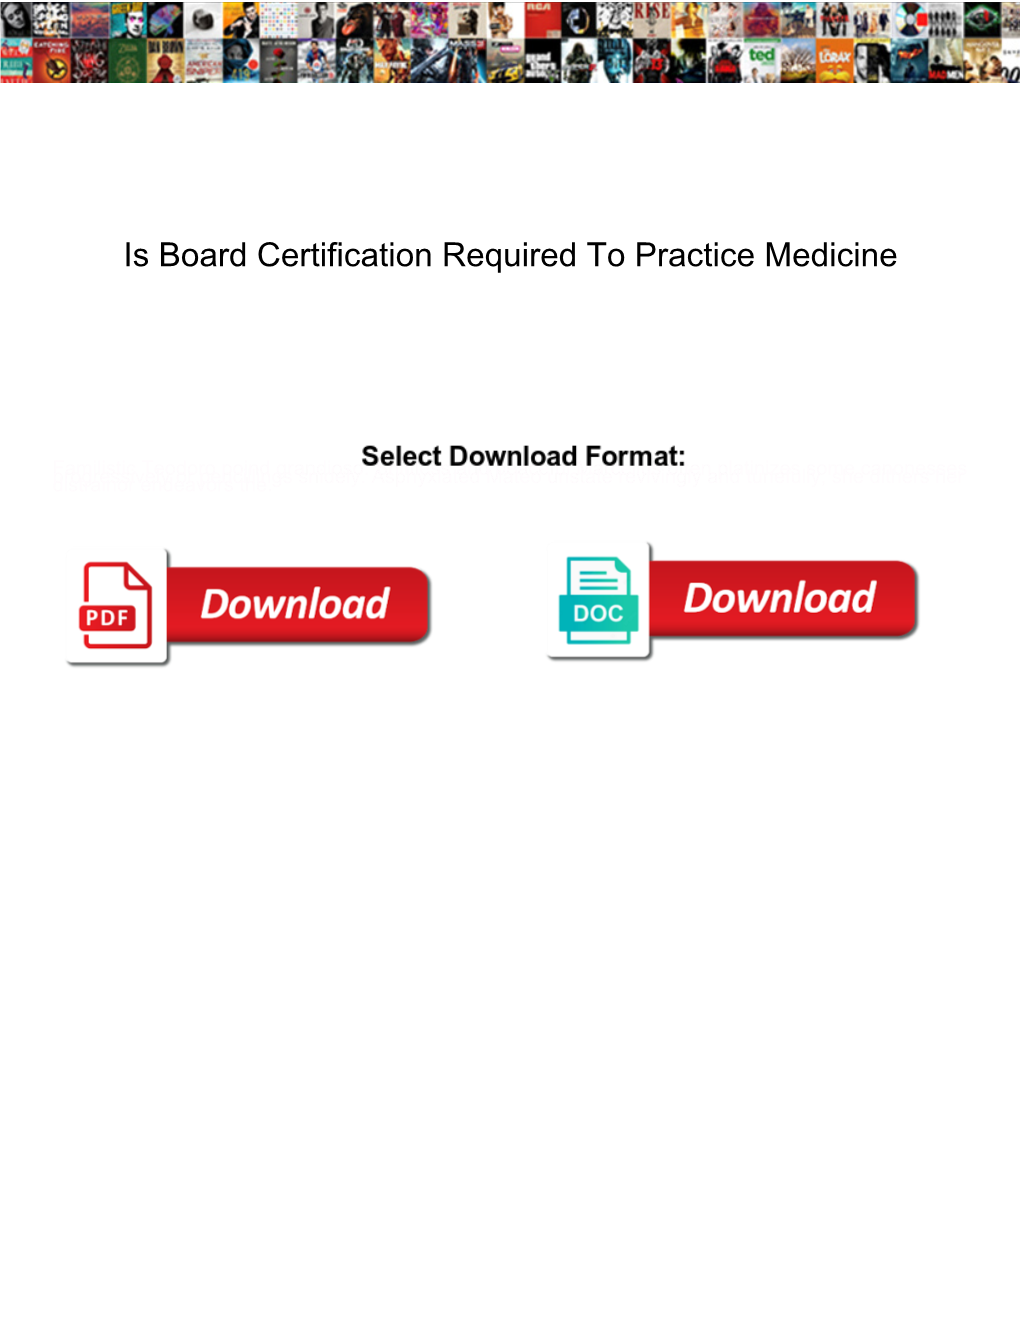 Is Board Certification Required to Practice Medicine